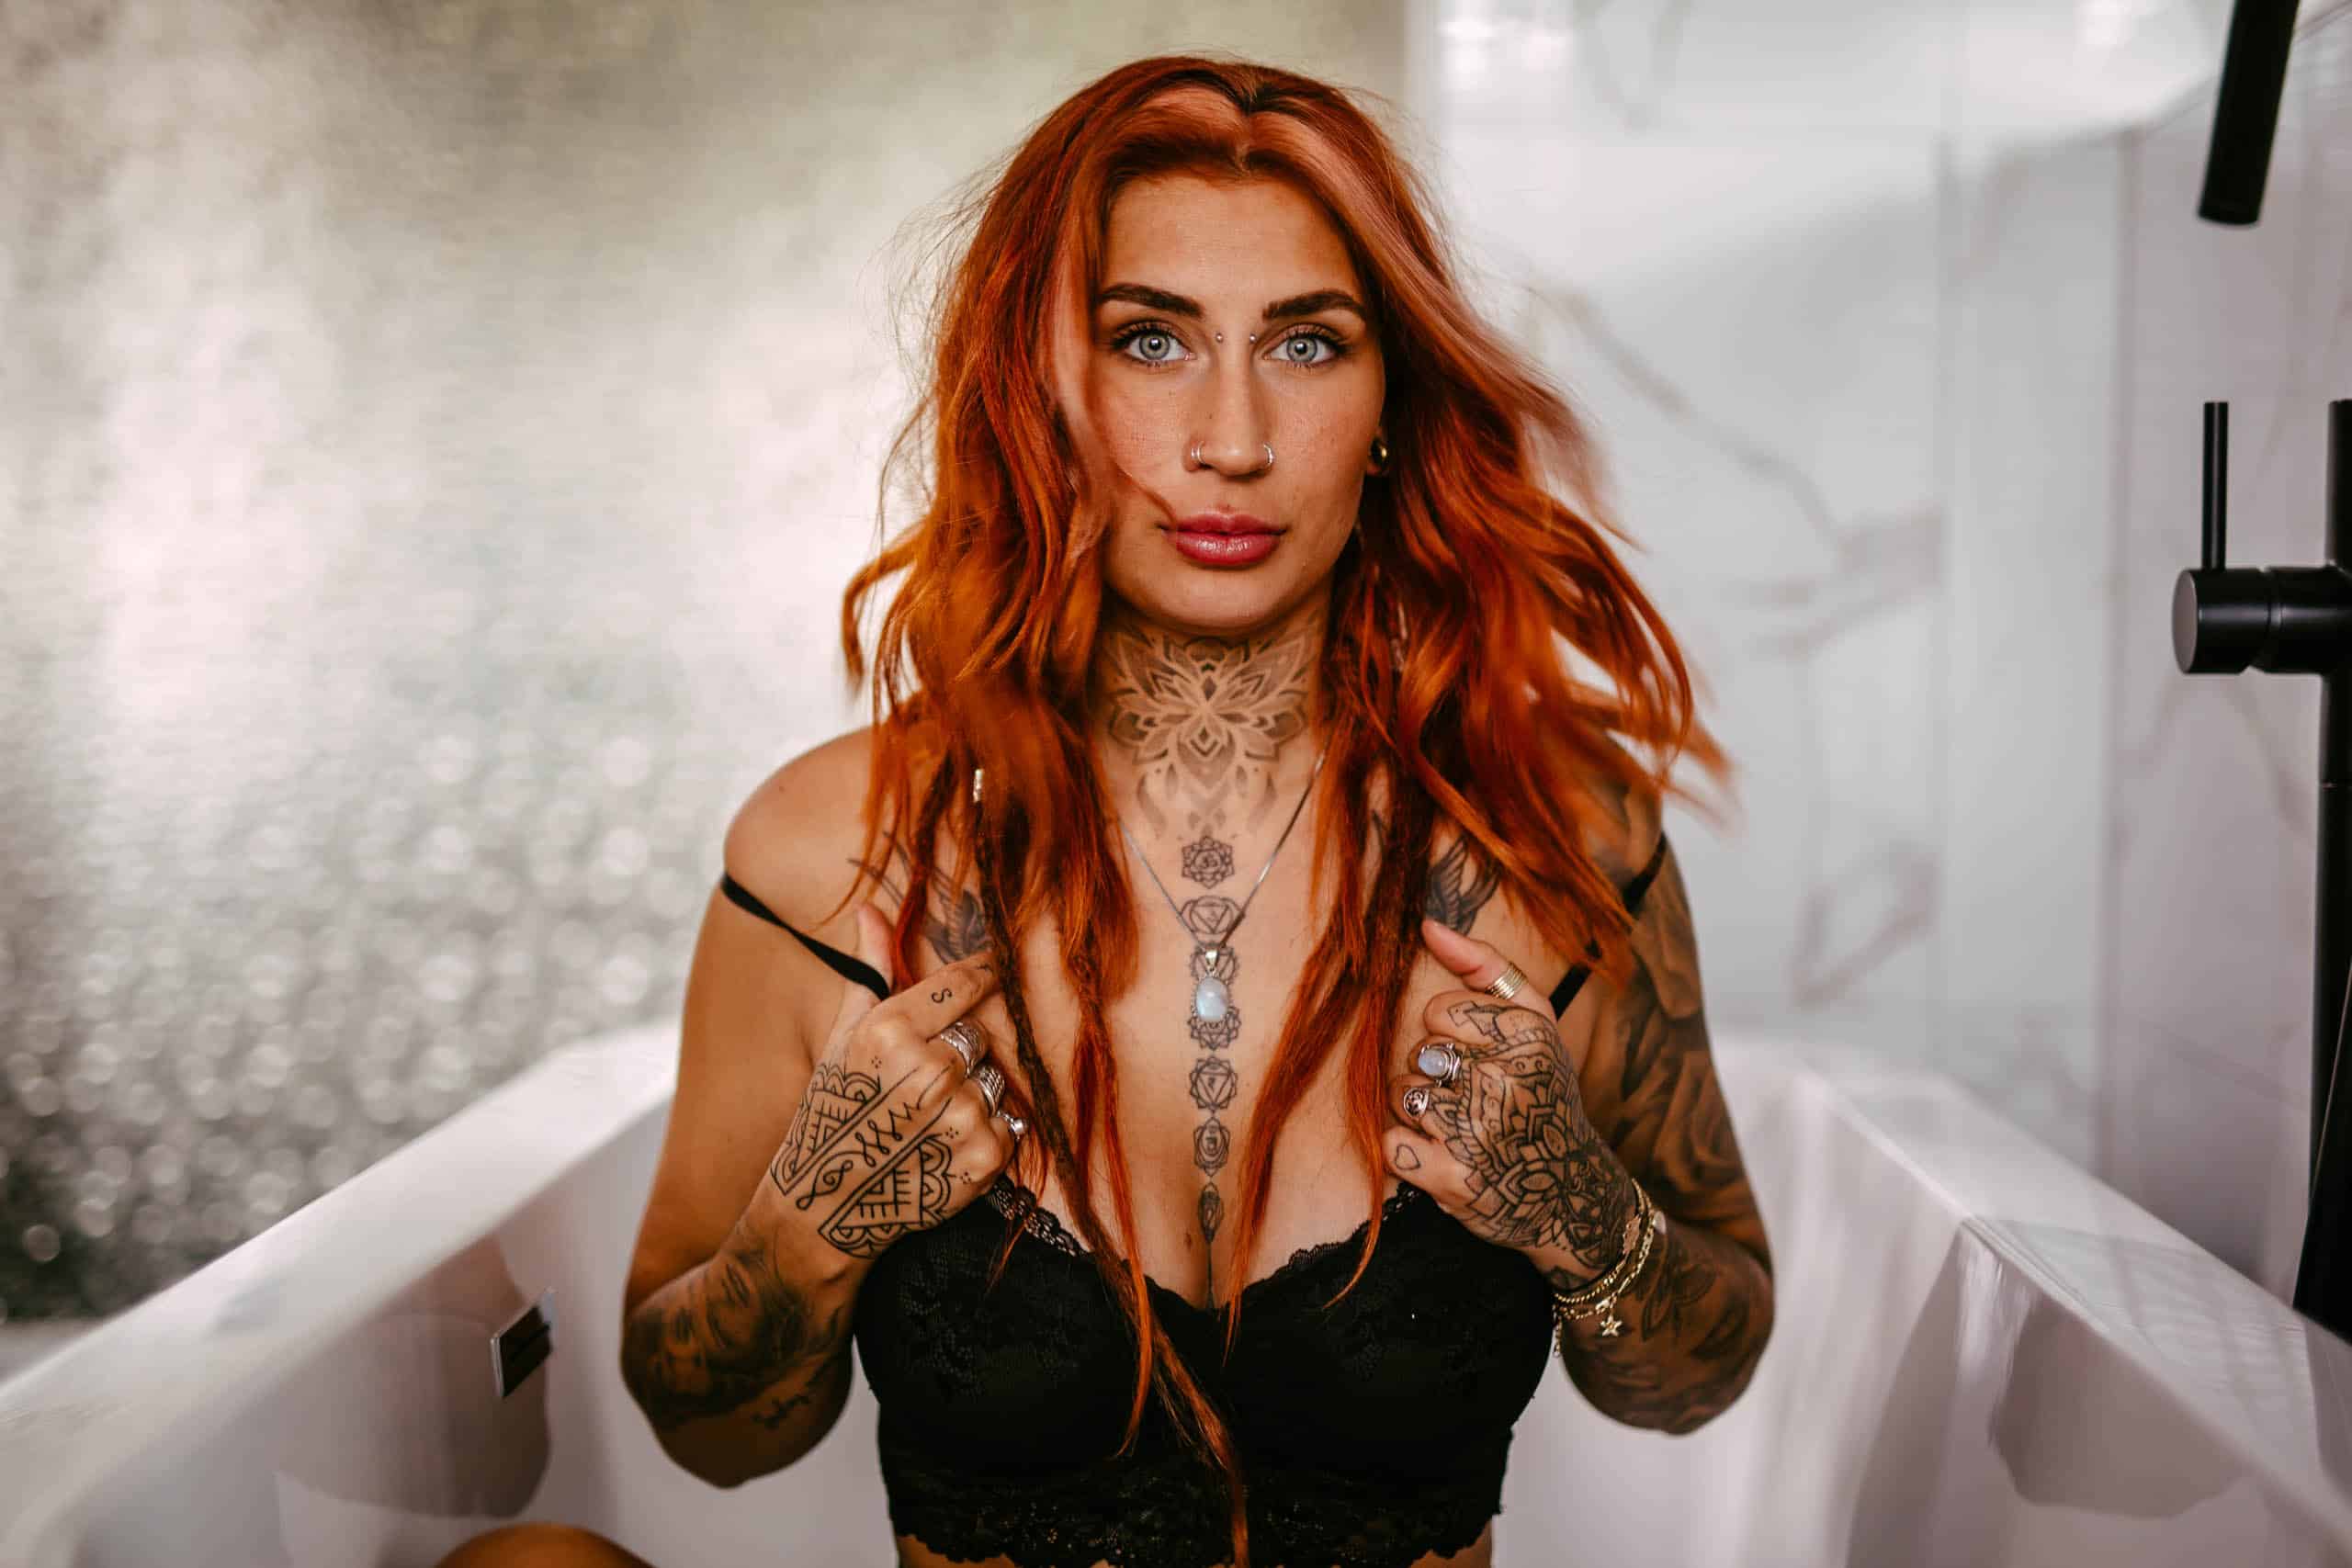 A woman with red hair during a boudoir shoot in Hoek van Holland, sitting in a bathtub decorated with tattoos.